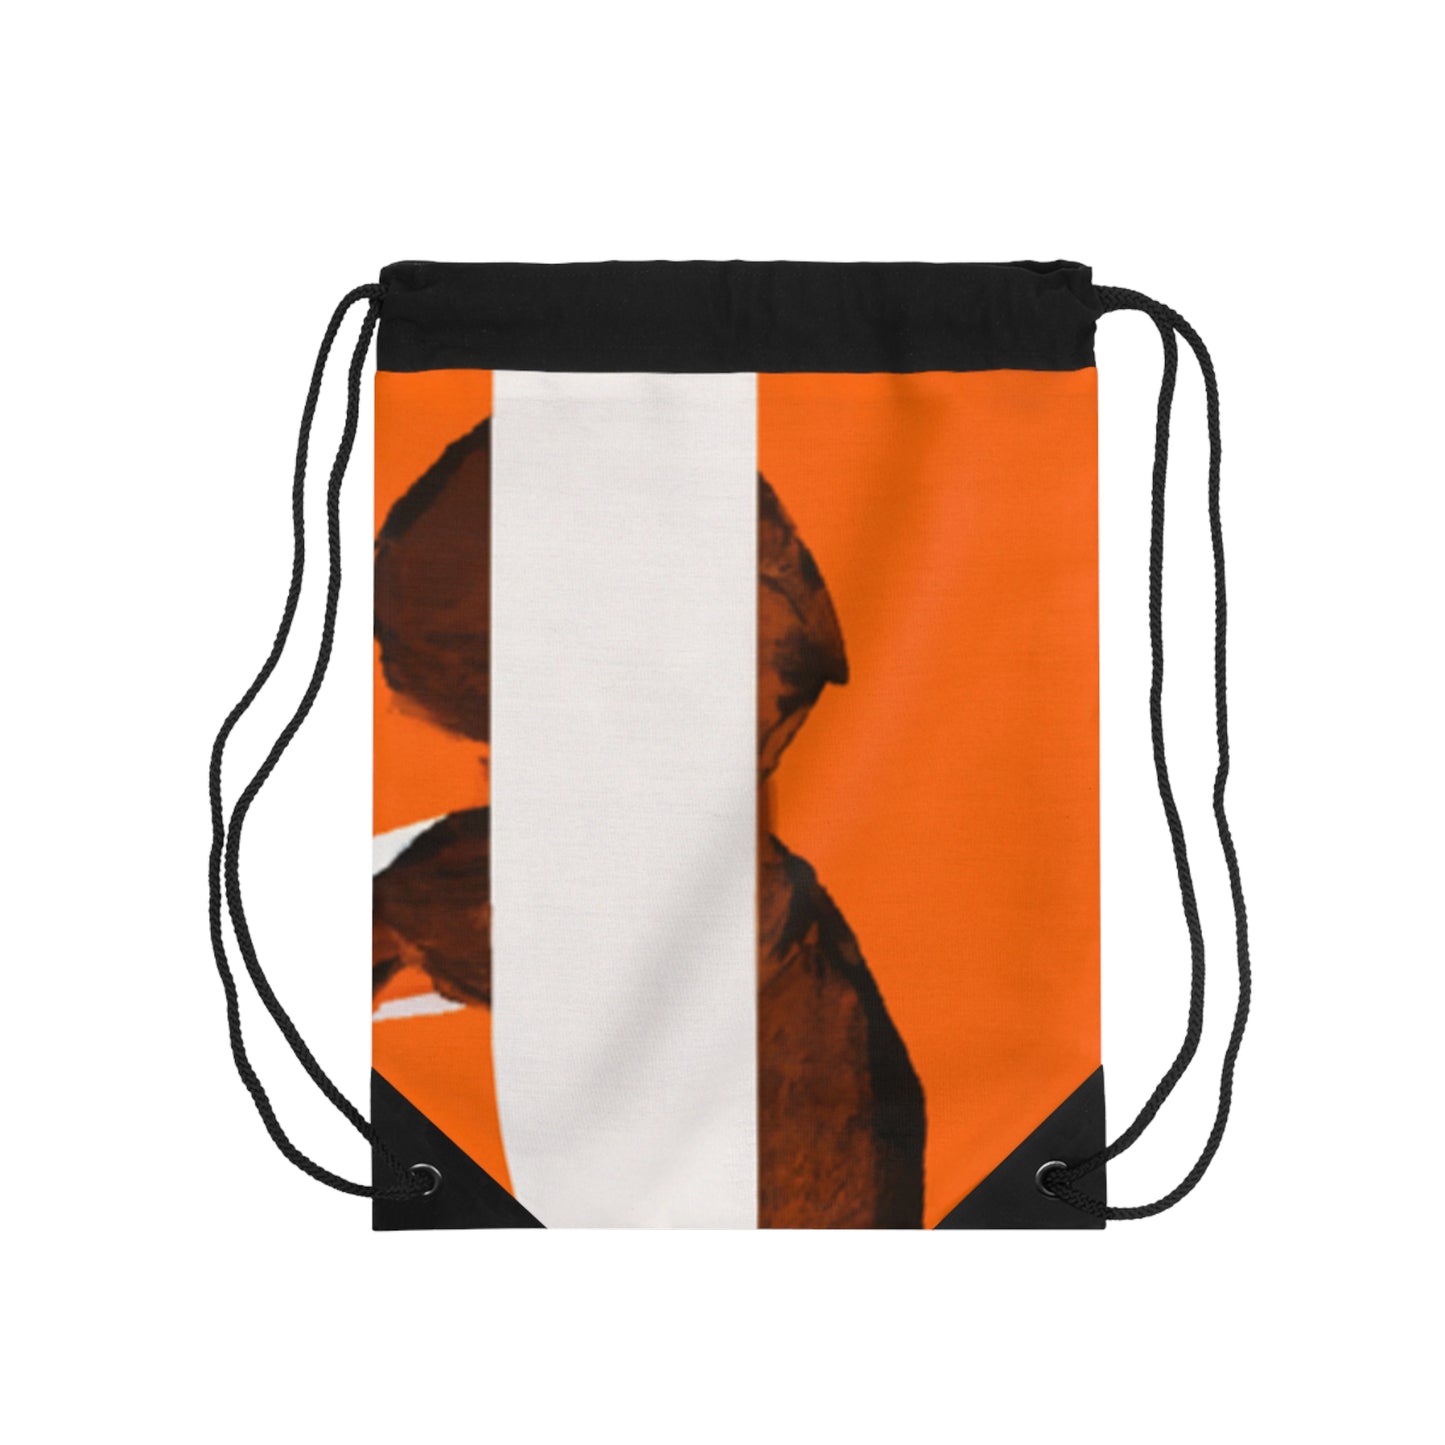 "The Power of Sports: A Bright and Dynamic Artwork" - Go Plus Drawstring Bag